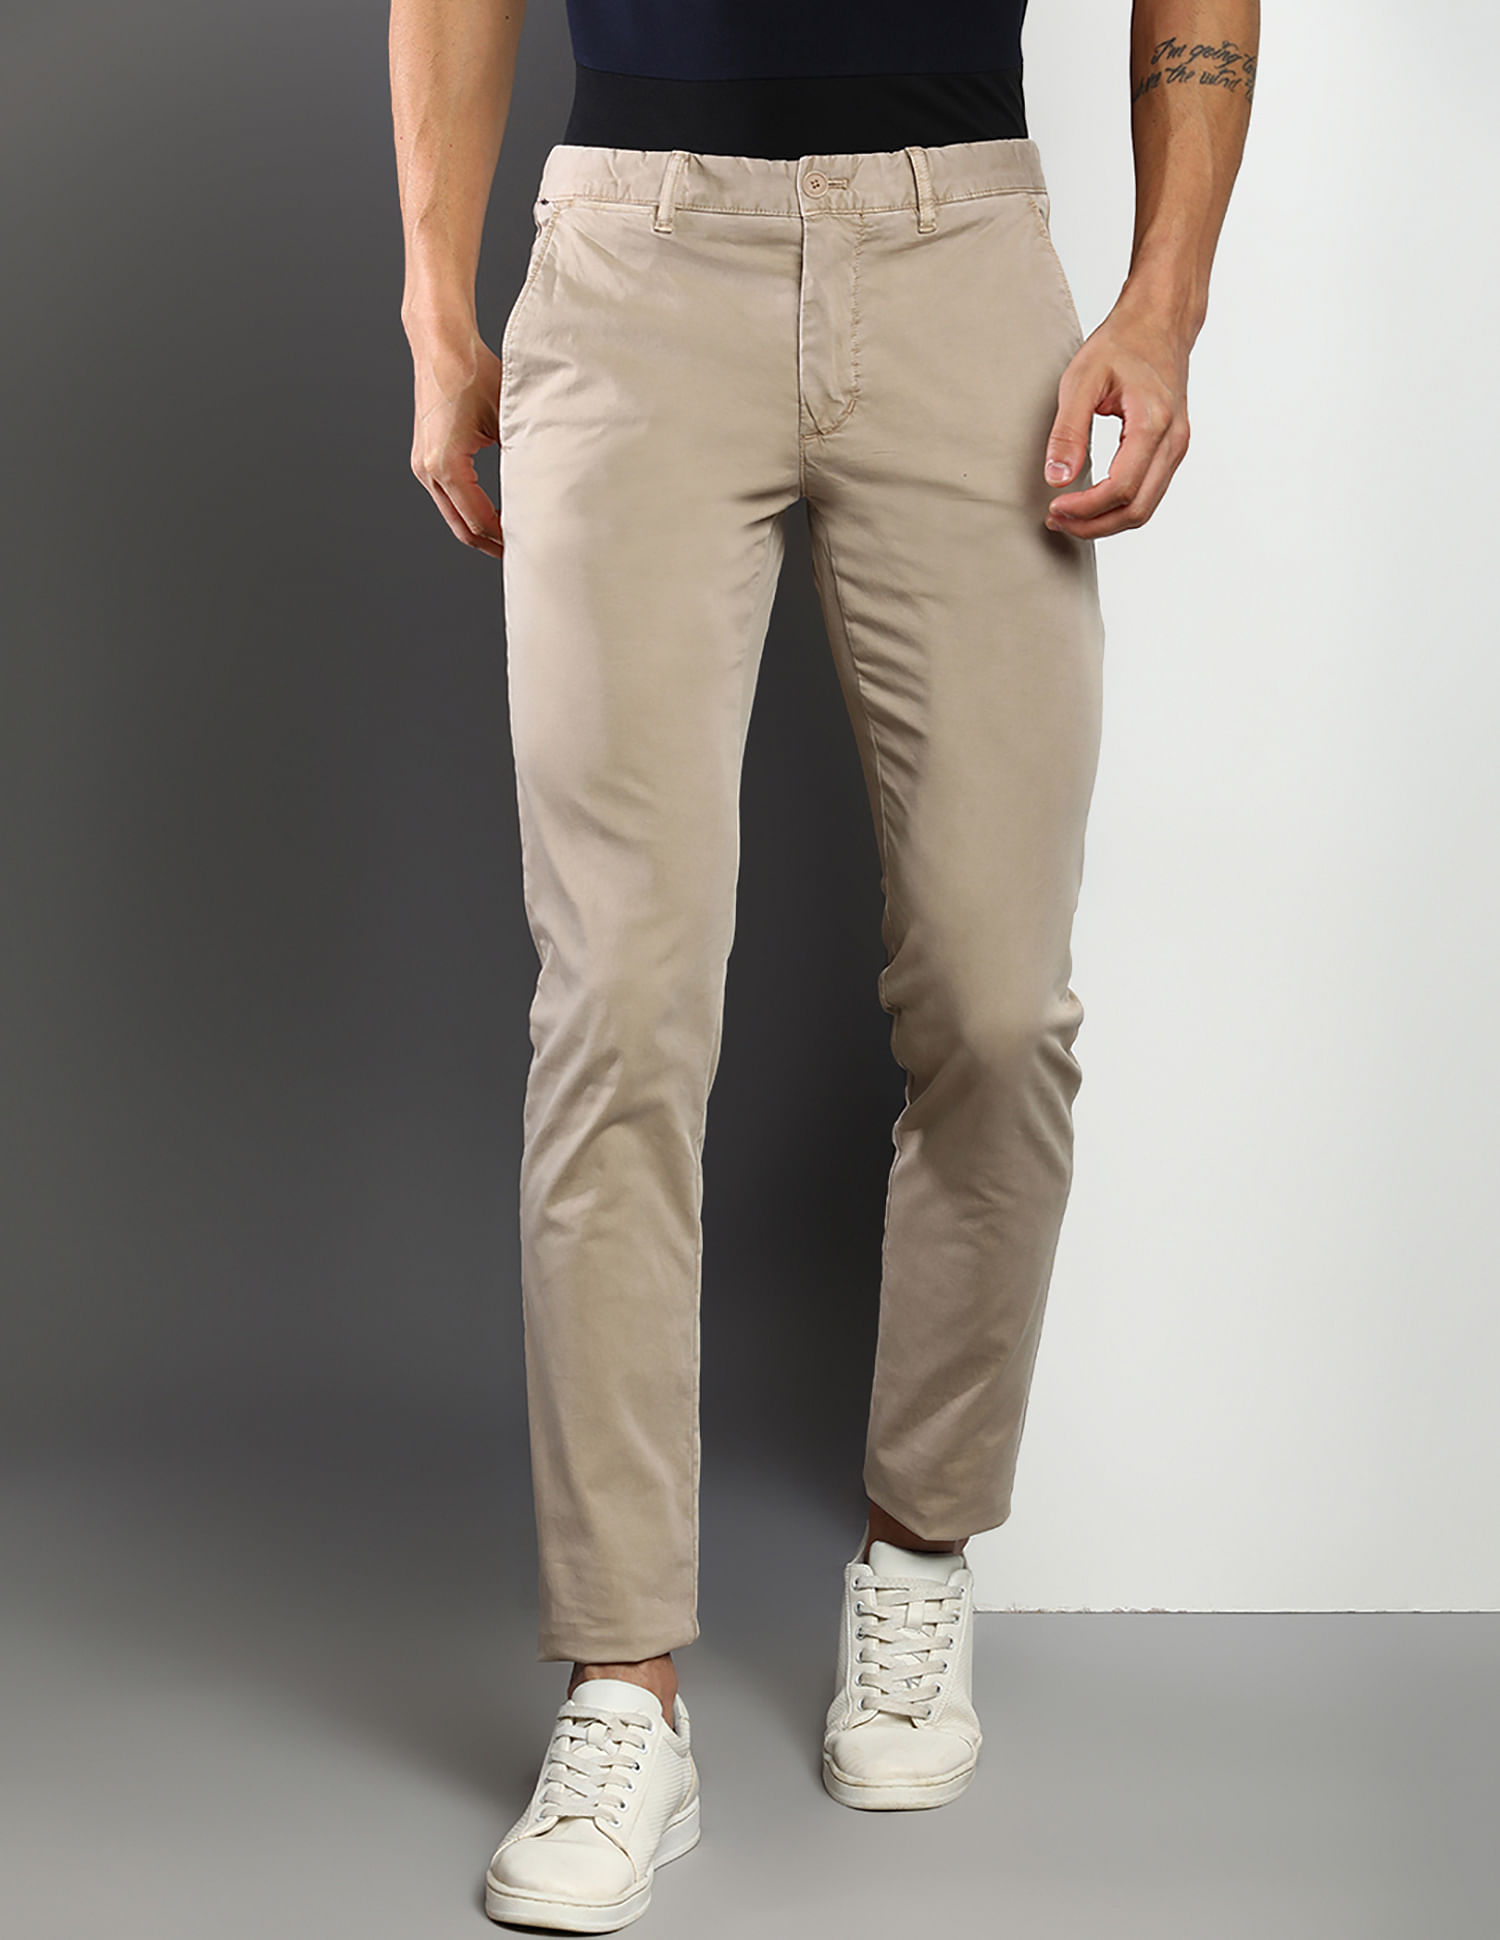 Buy Tommy Hilfiger Bleecker Slim Fit Trousers - NNNOW.com